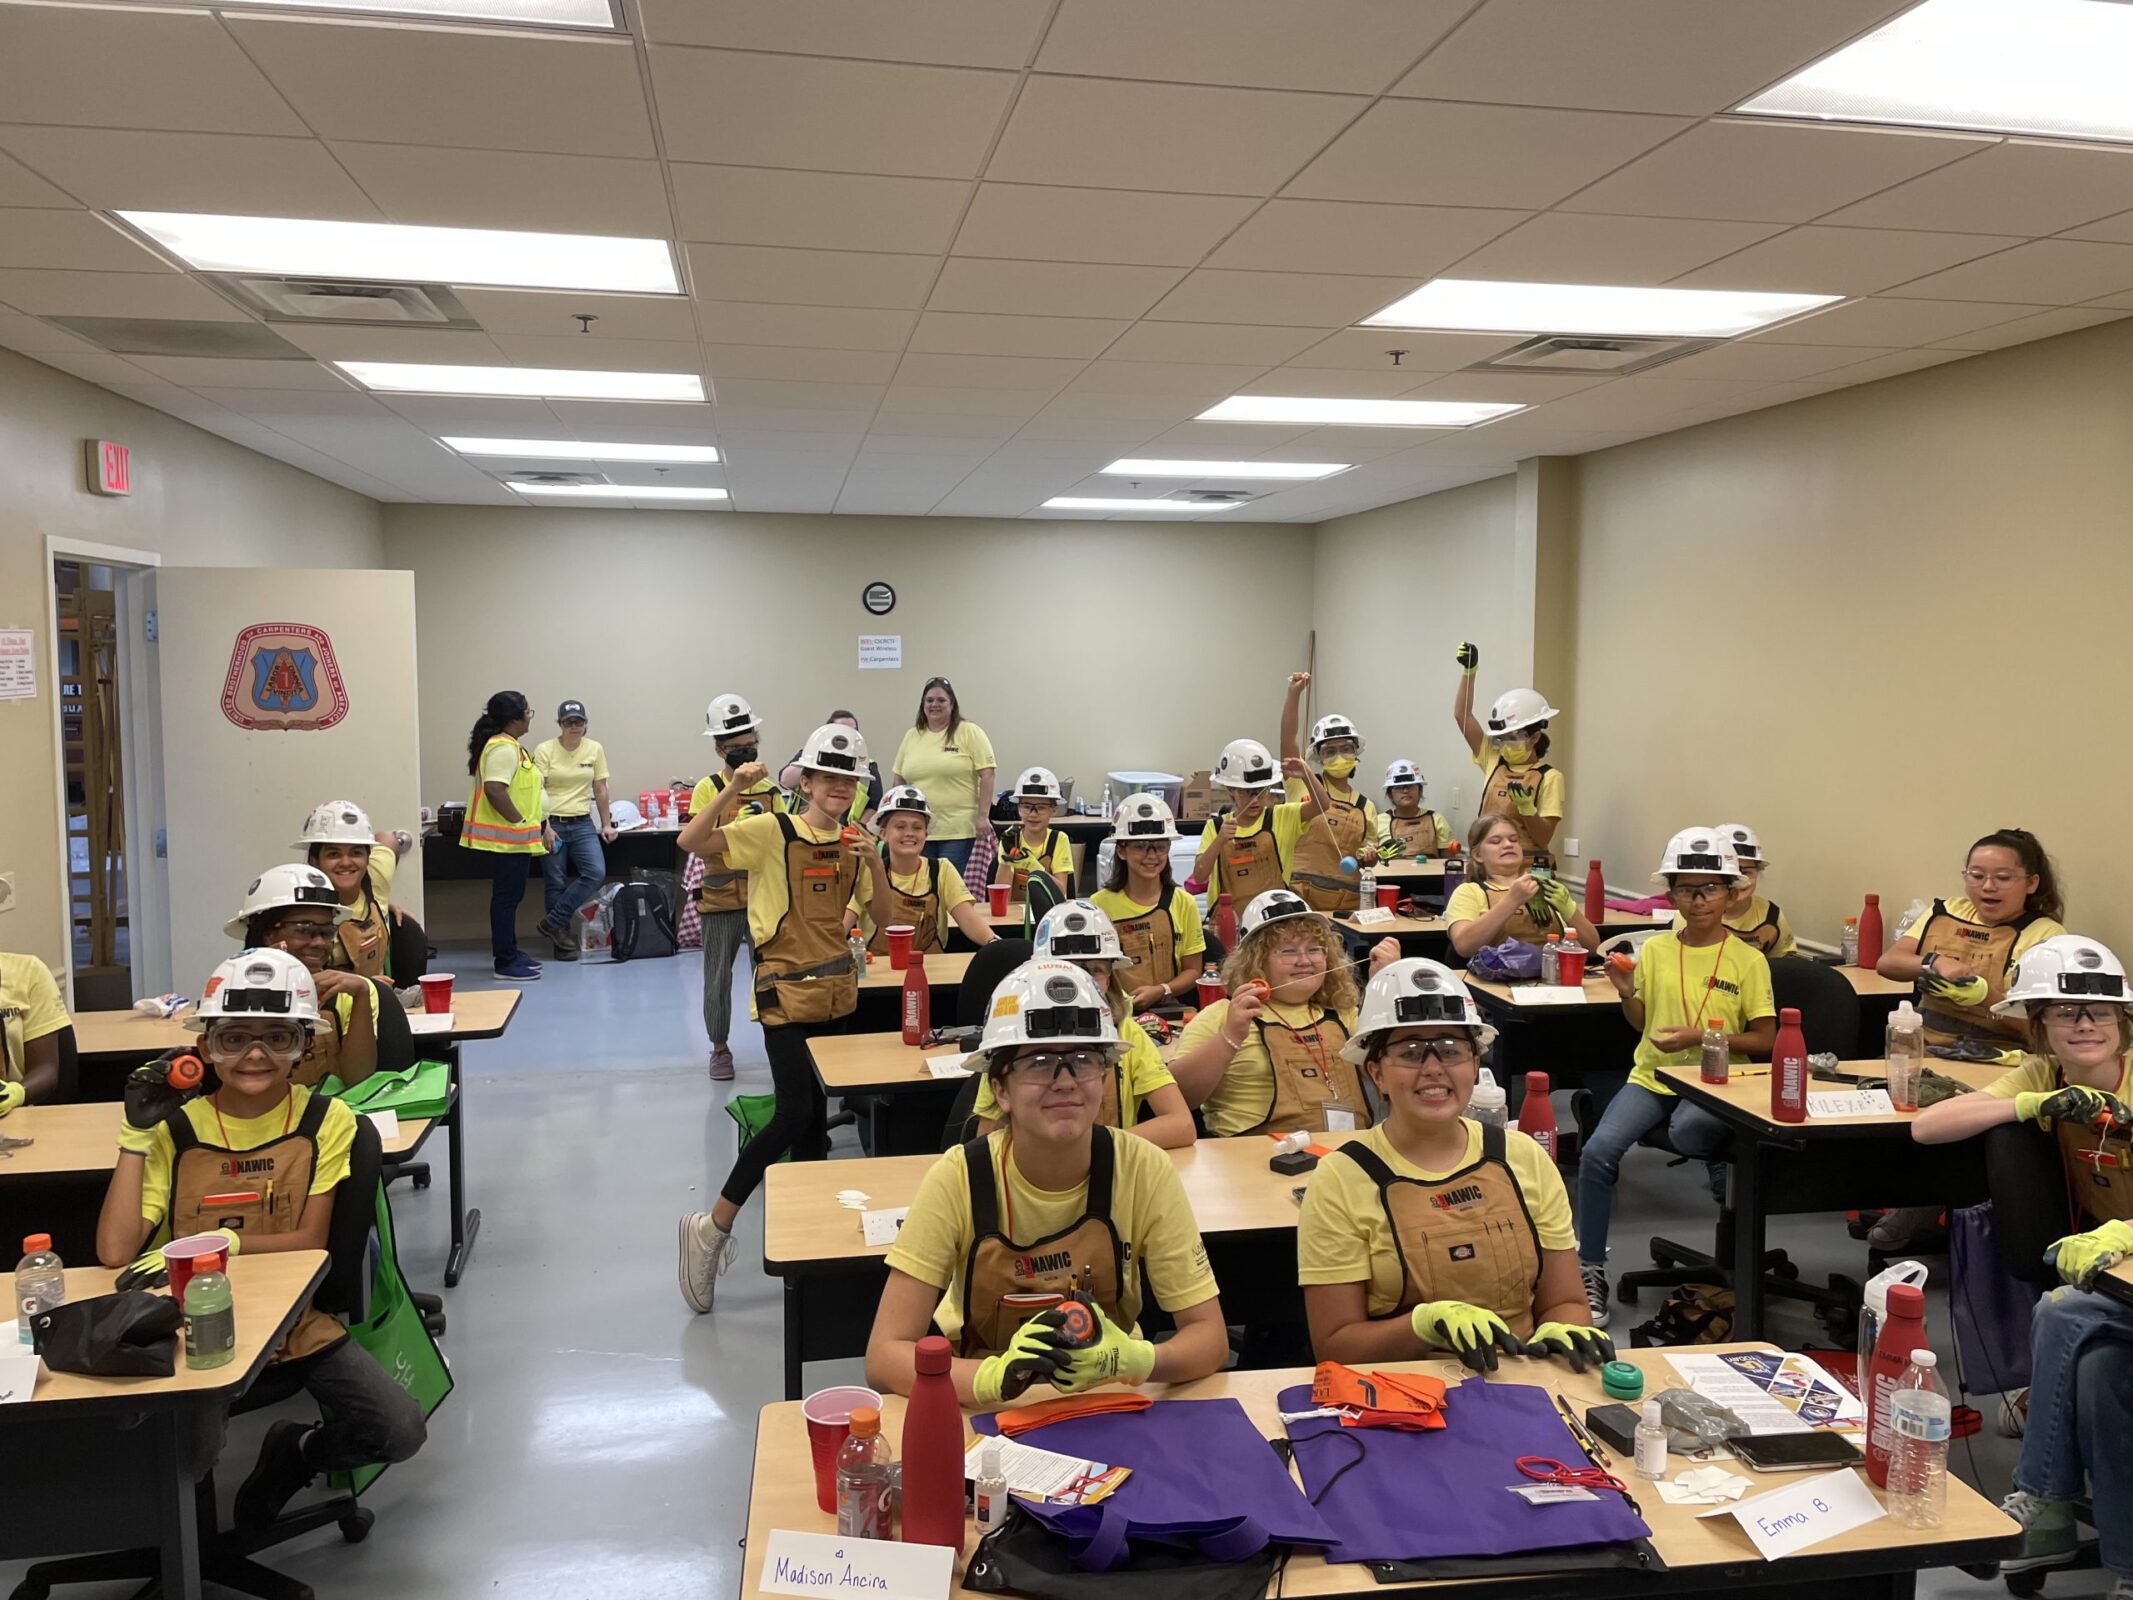 IBEW Local 520 sponsors a construction camp for middle school girls